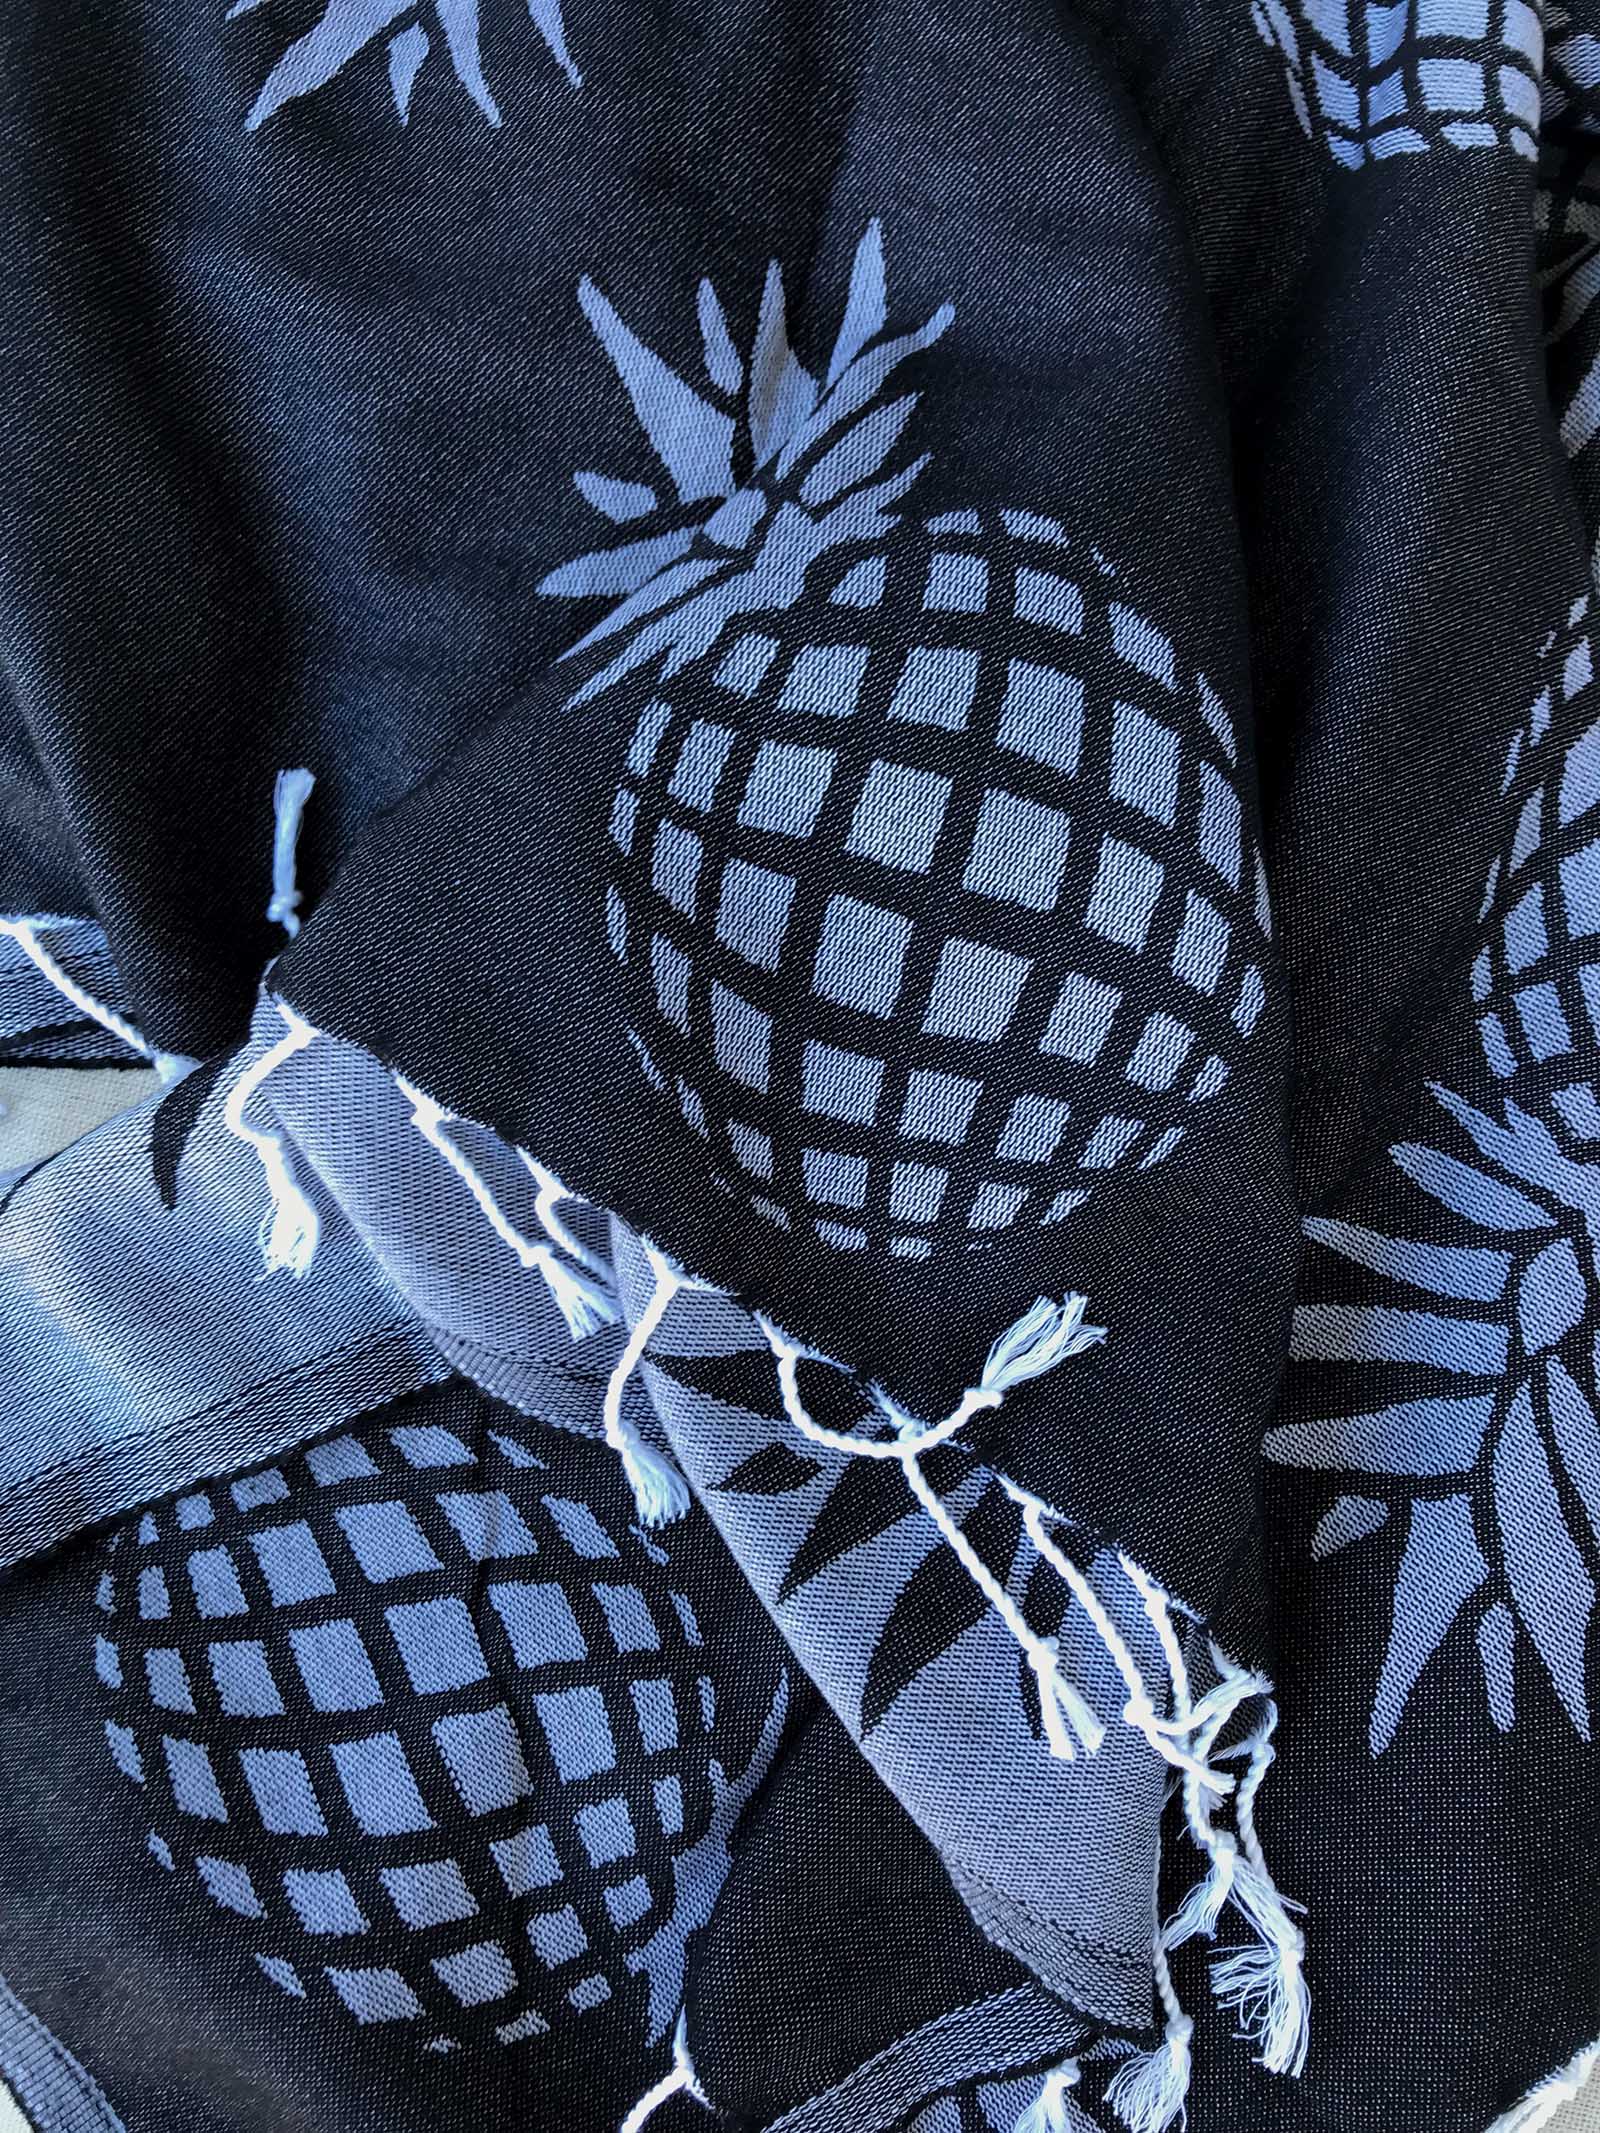 Antigua black pineapples Turkish Towel with Pocket by Freostyle sustainable beach products, close up of weave